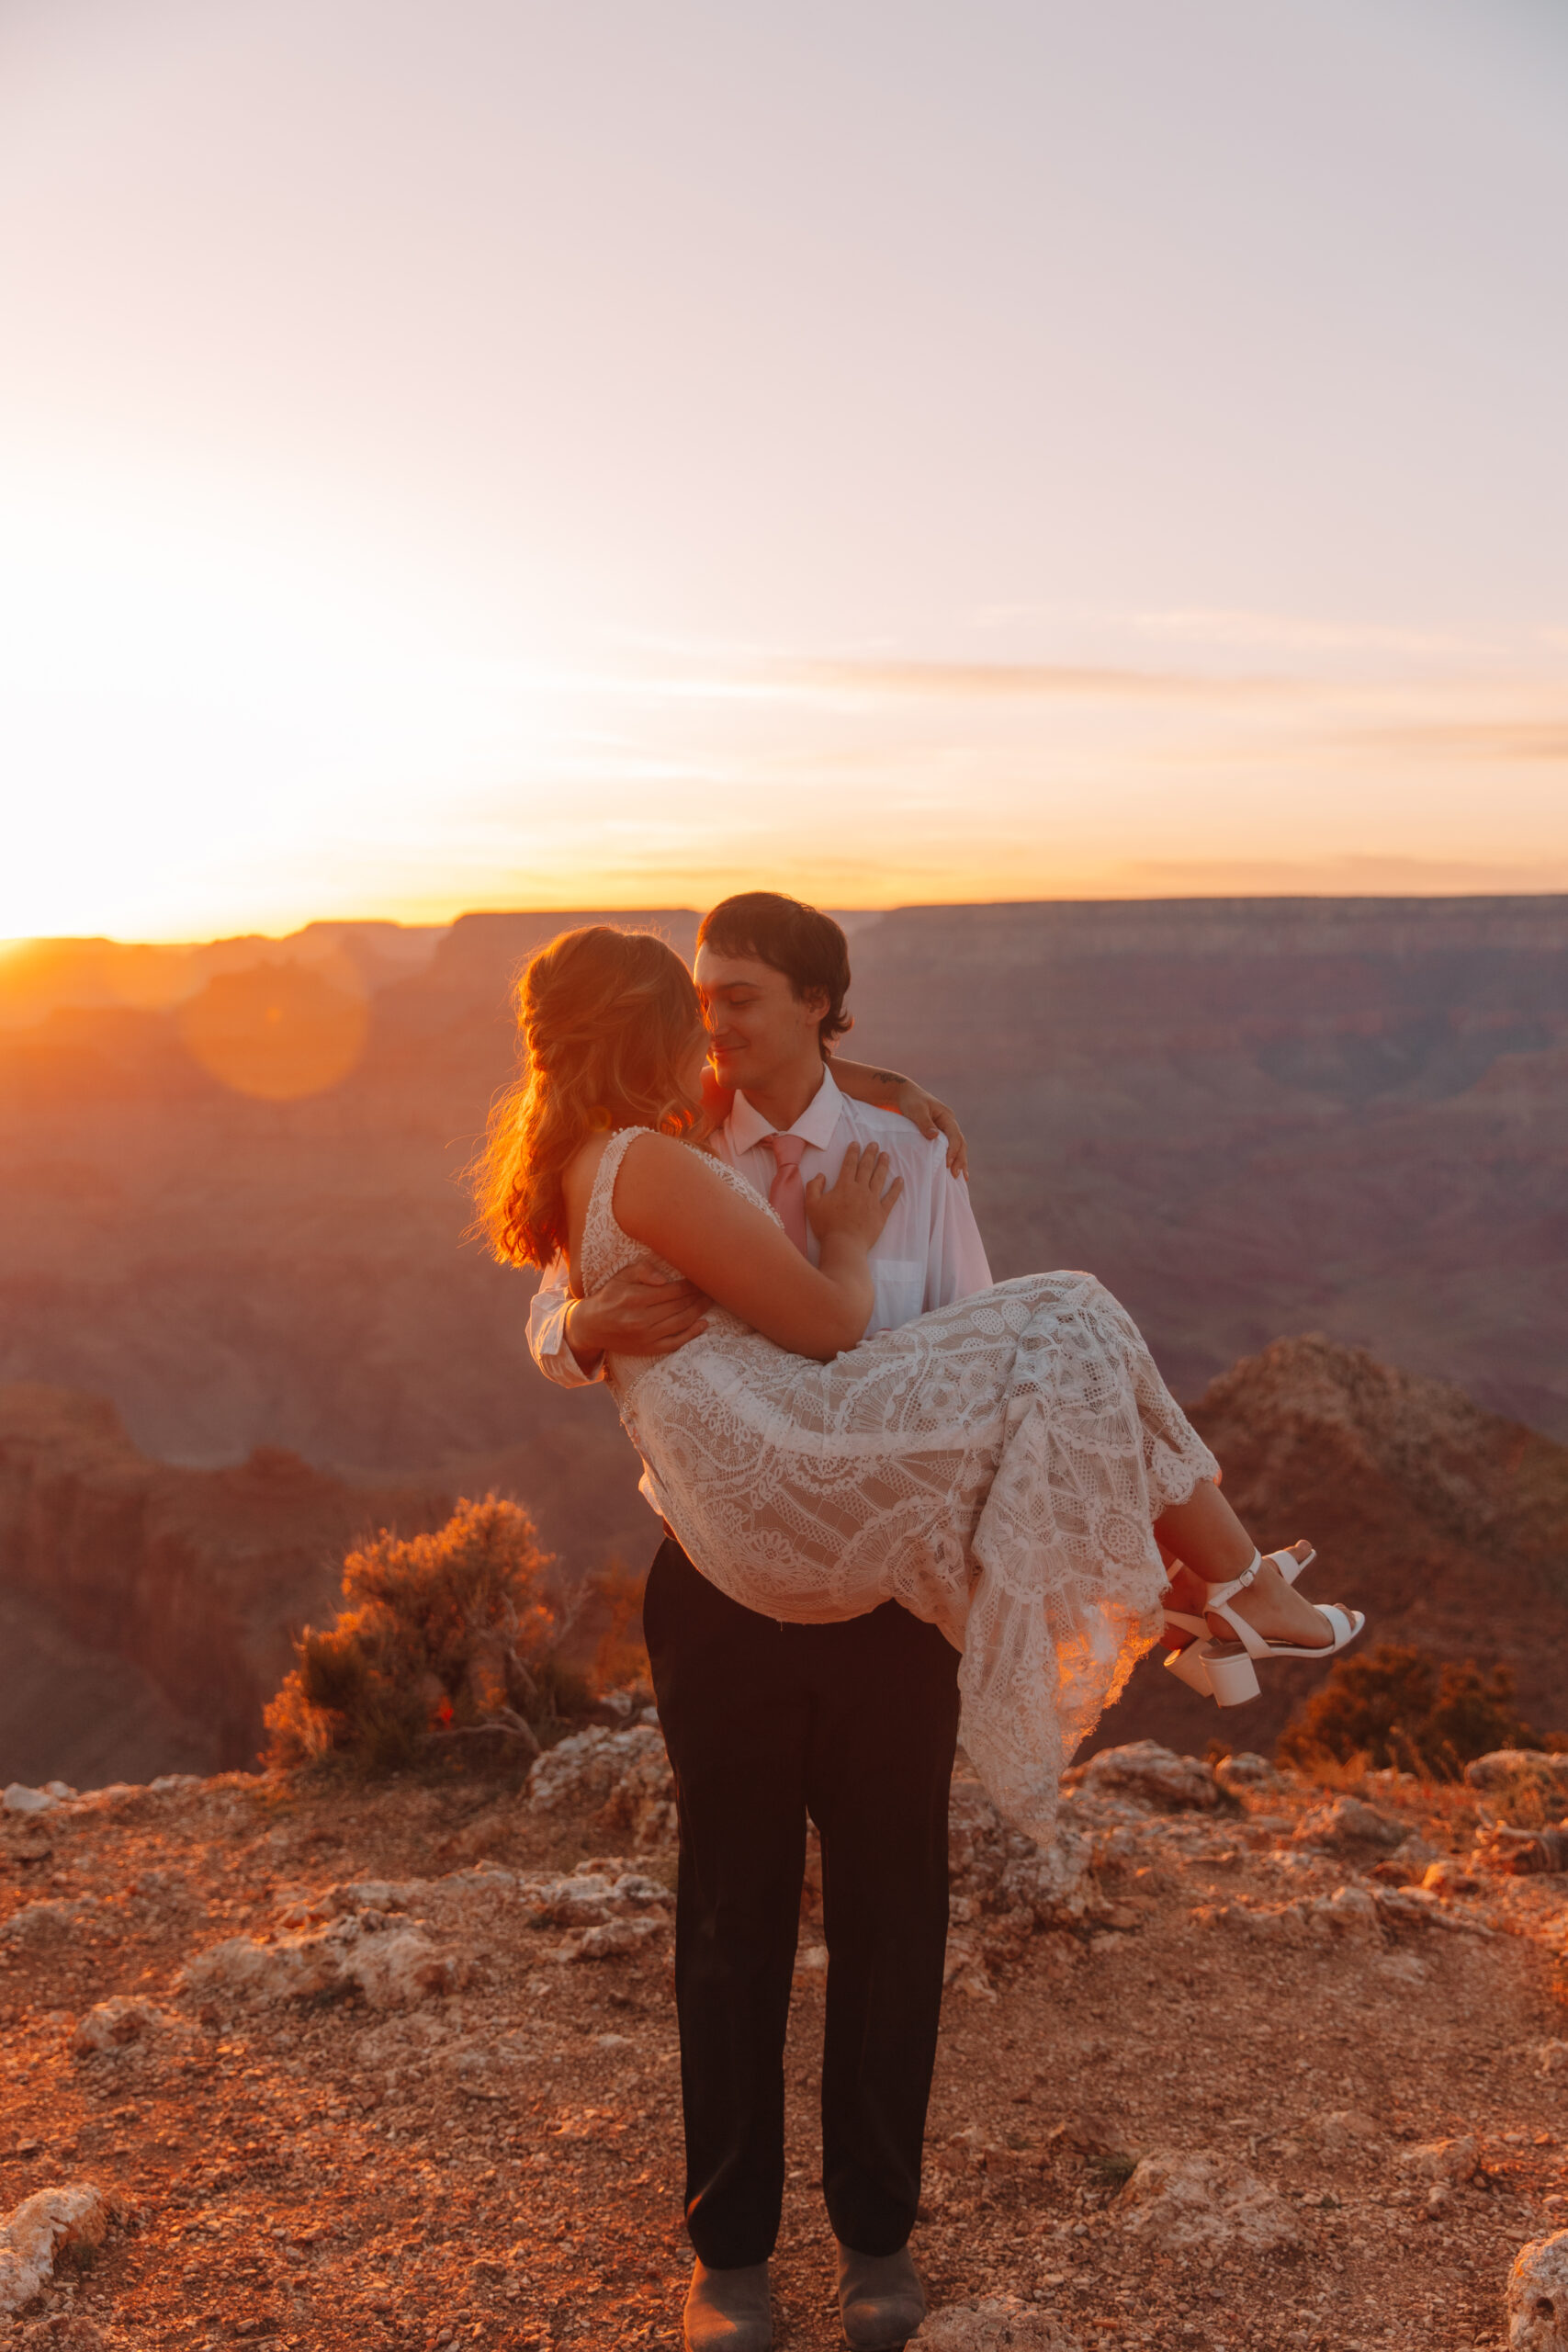 A groom picking up his bride and holding her like a baby as they walk across the cliff in the Grand Canyon. The sun is setting behind them